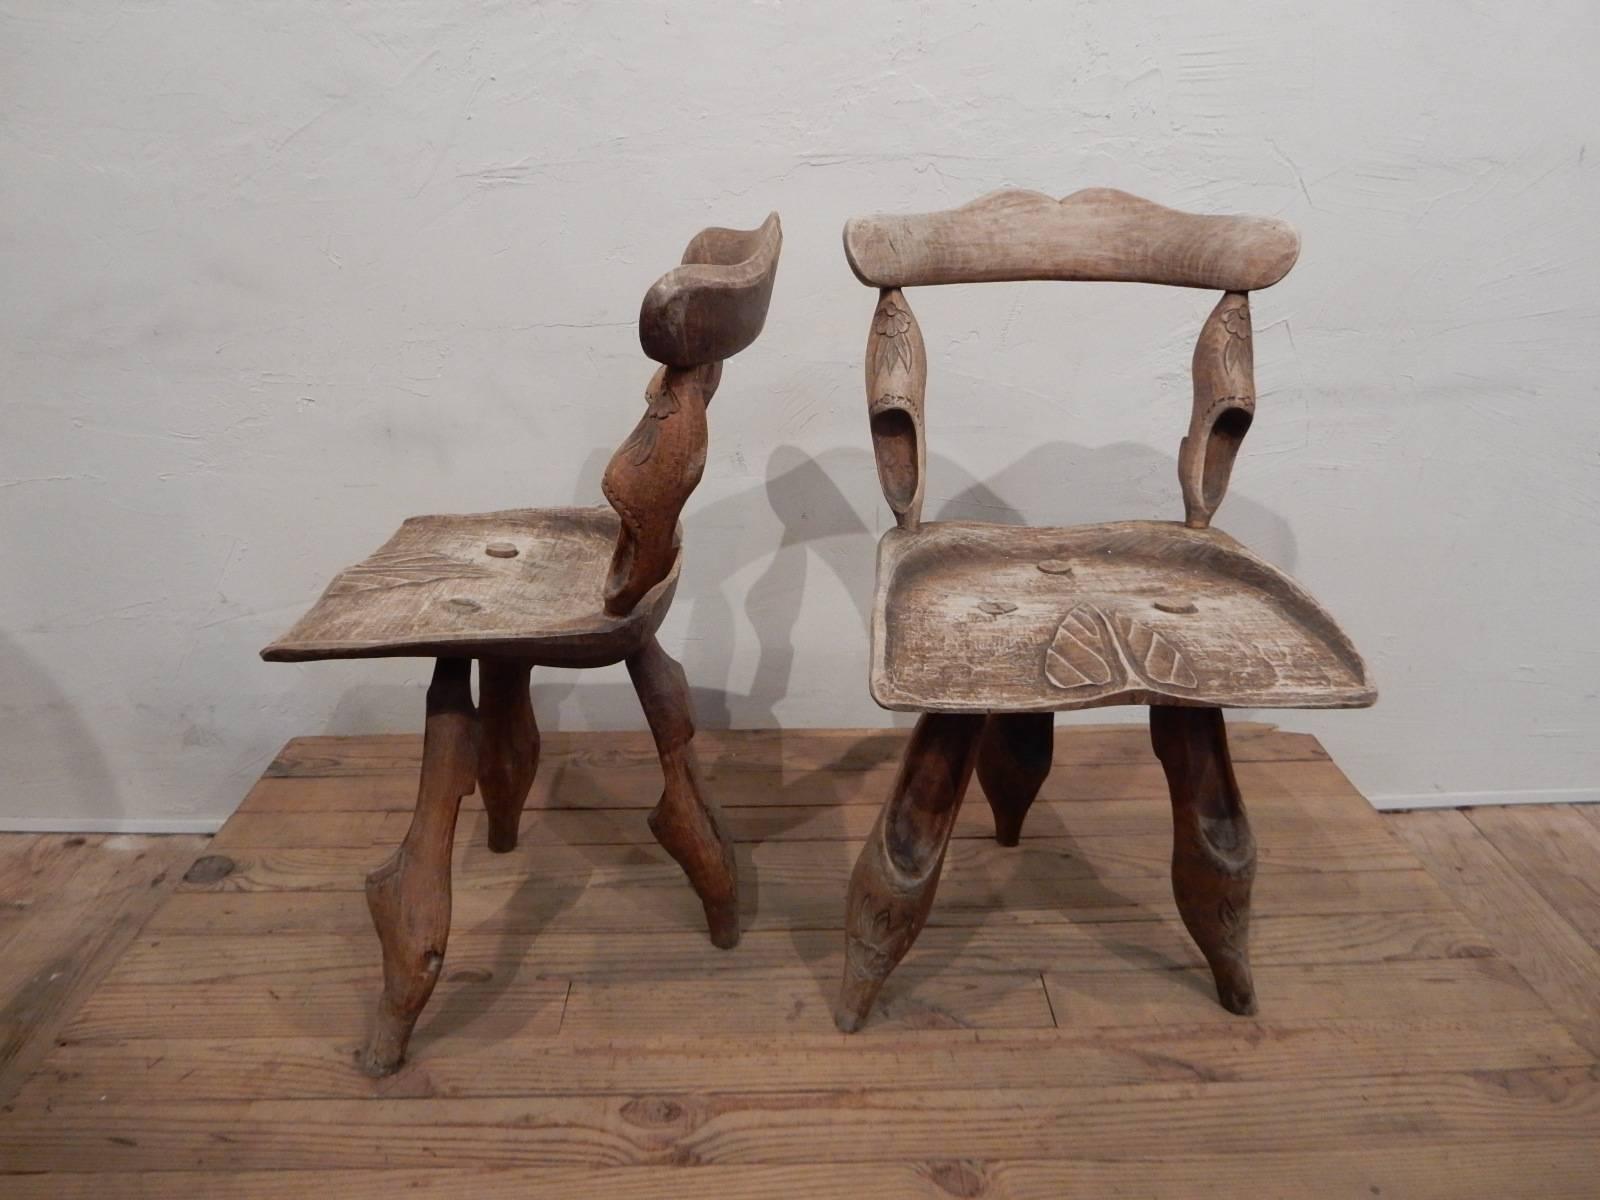 Wood Pair of Popular Art Chairs